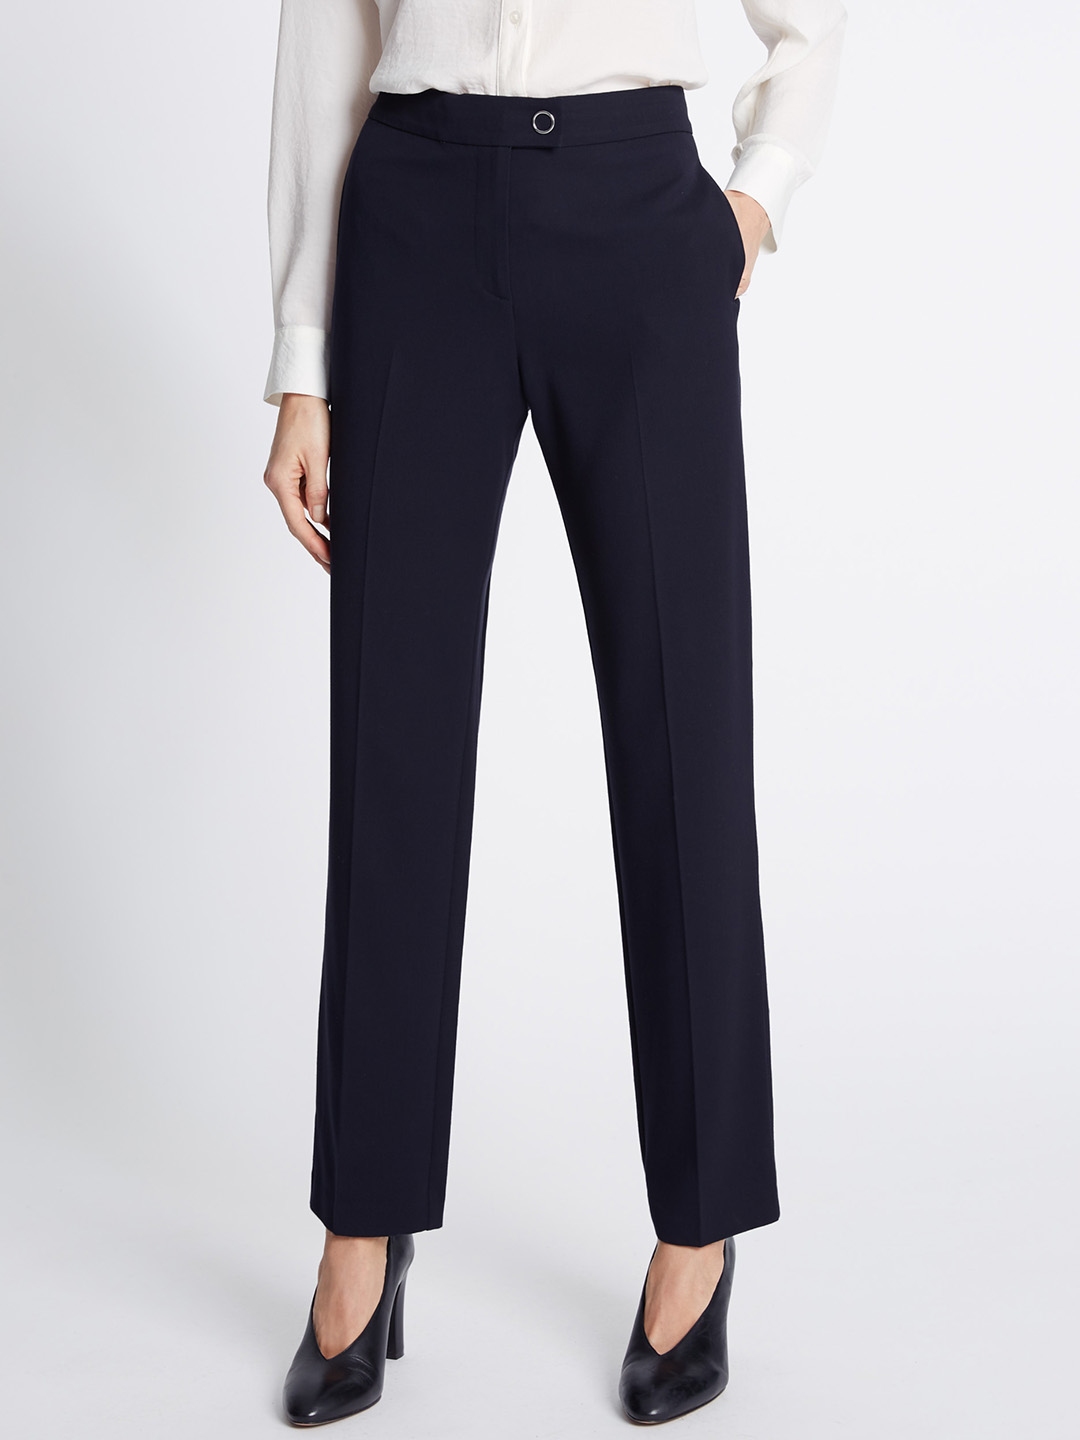 Marks & Spencer Women Navy Blue Straight Fit Solid Formal Trousers